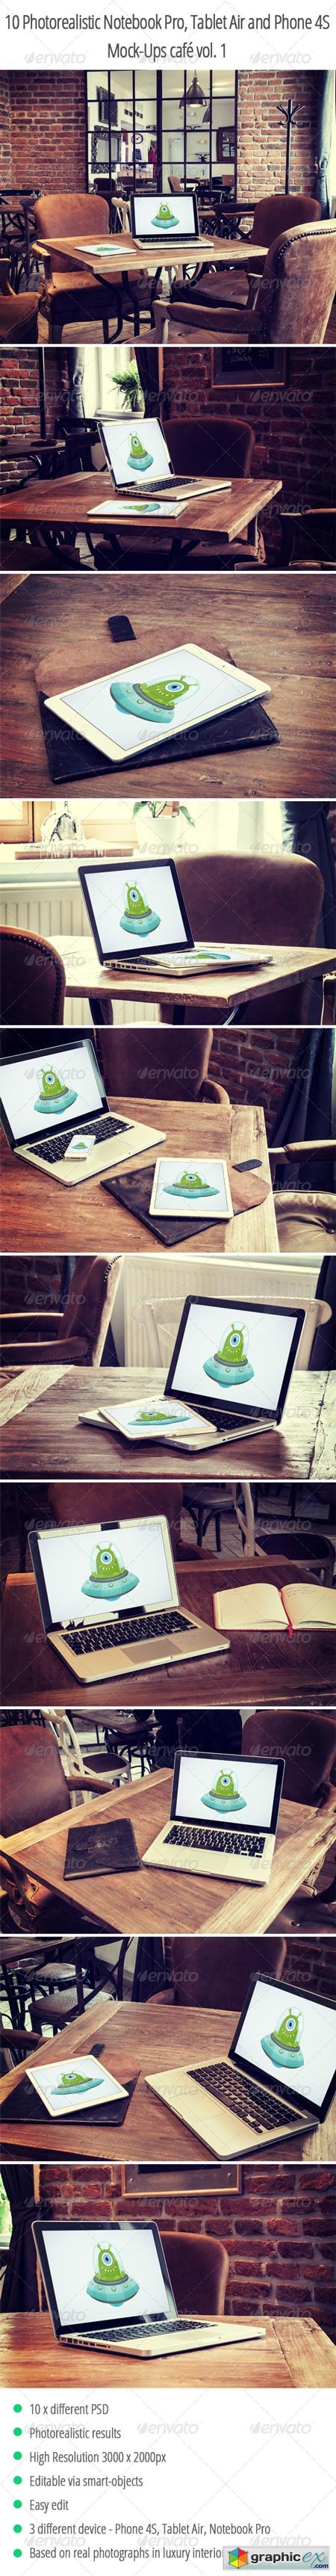 10 Photorealistic Device Mock-Ups in Cafe Vol.1 6652634